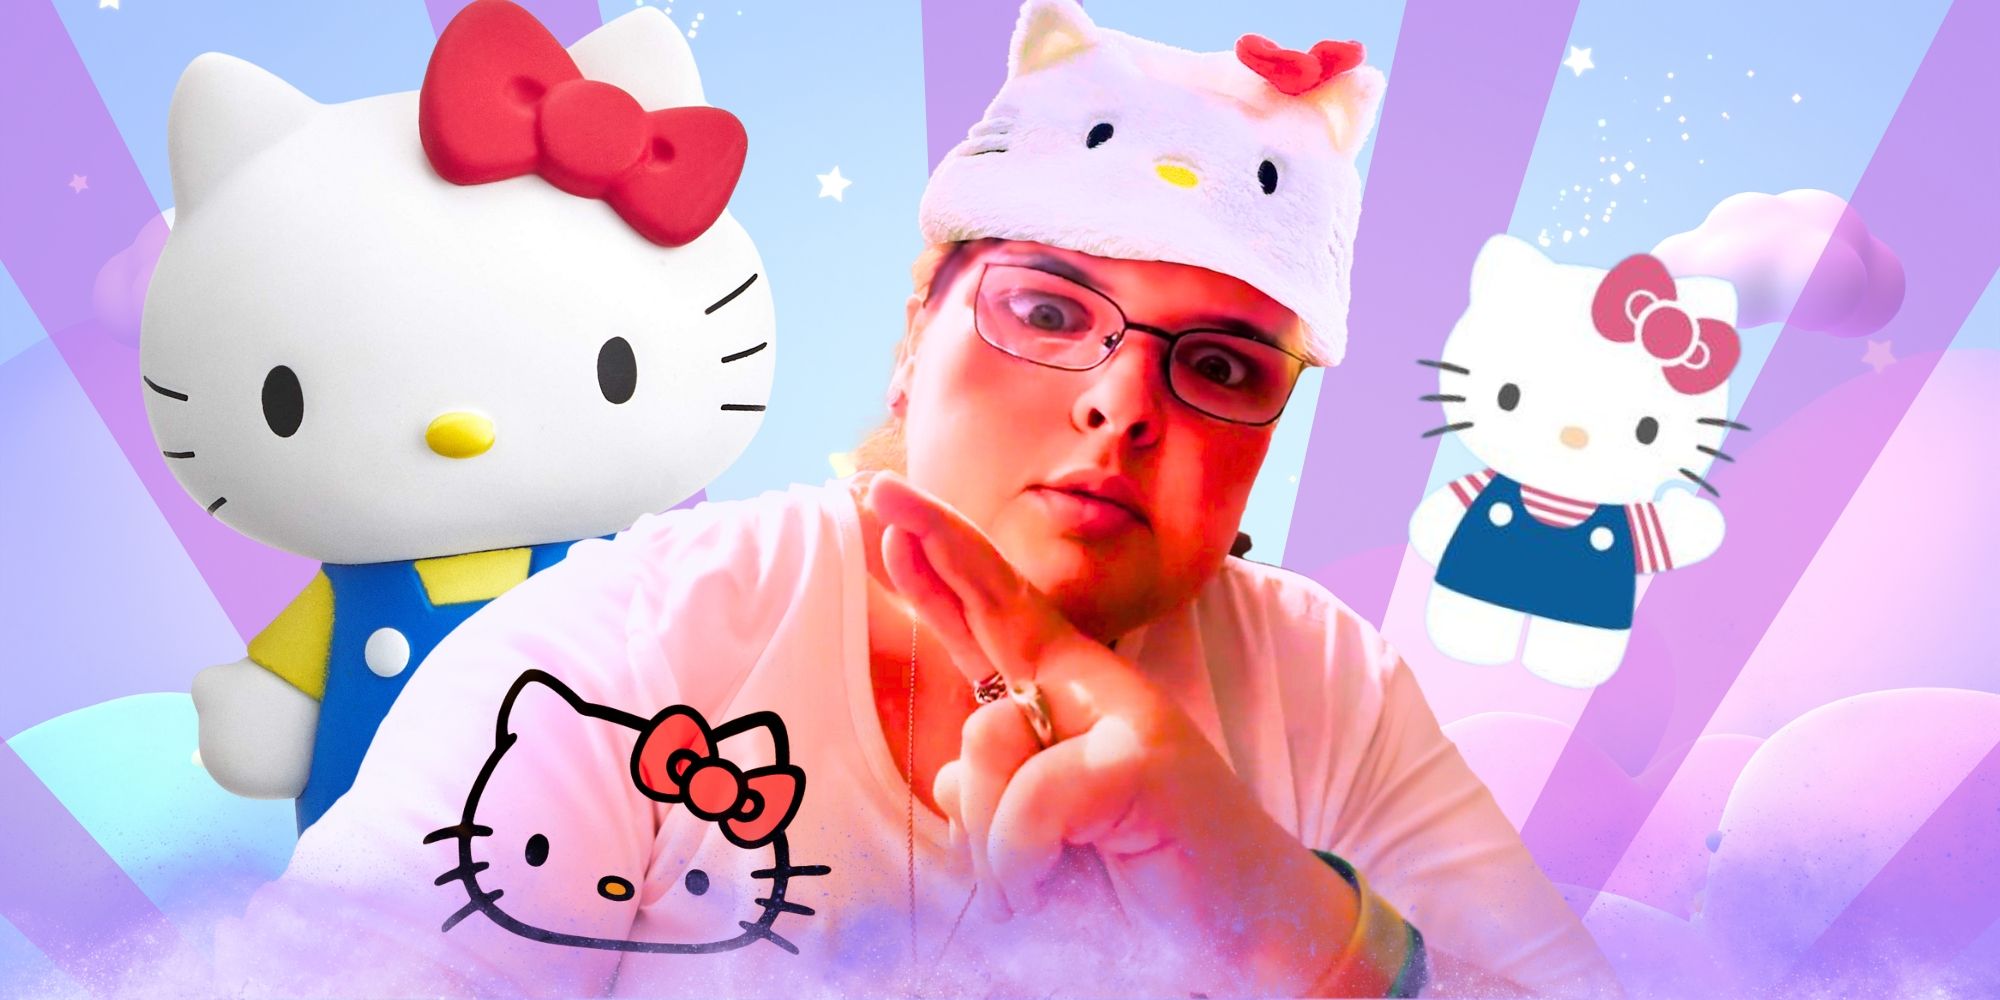 1000-Lb Sisters Tammy Slaton hello kitty montage tammy pointing finger with hello kitty cartoon characters